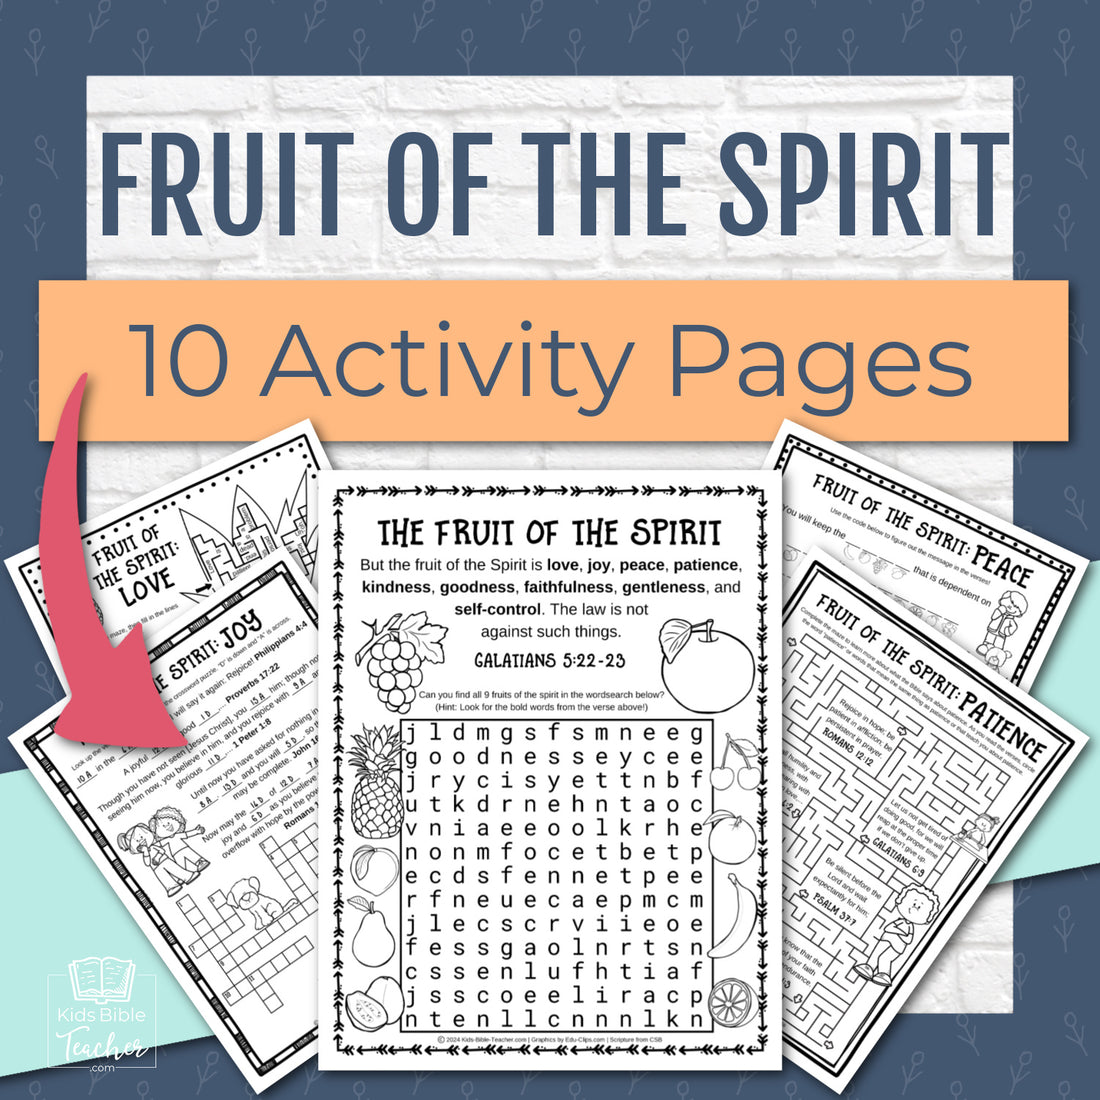 Fruit of the Spirit Activity Pages